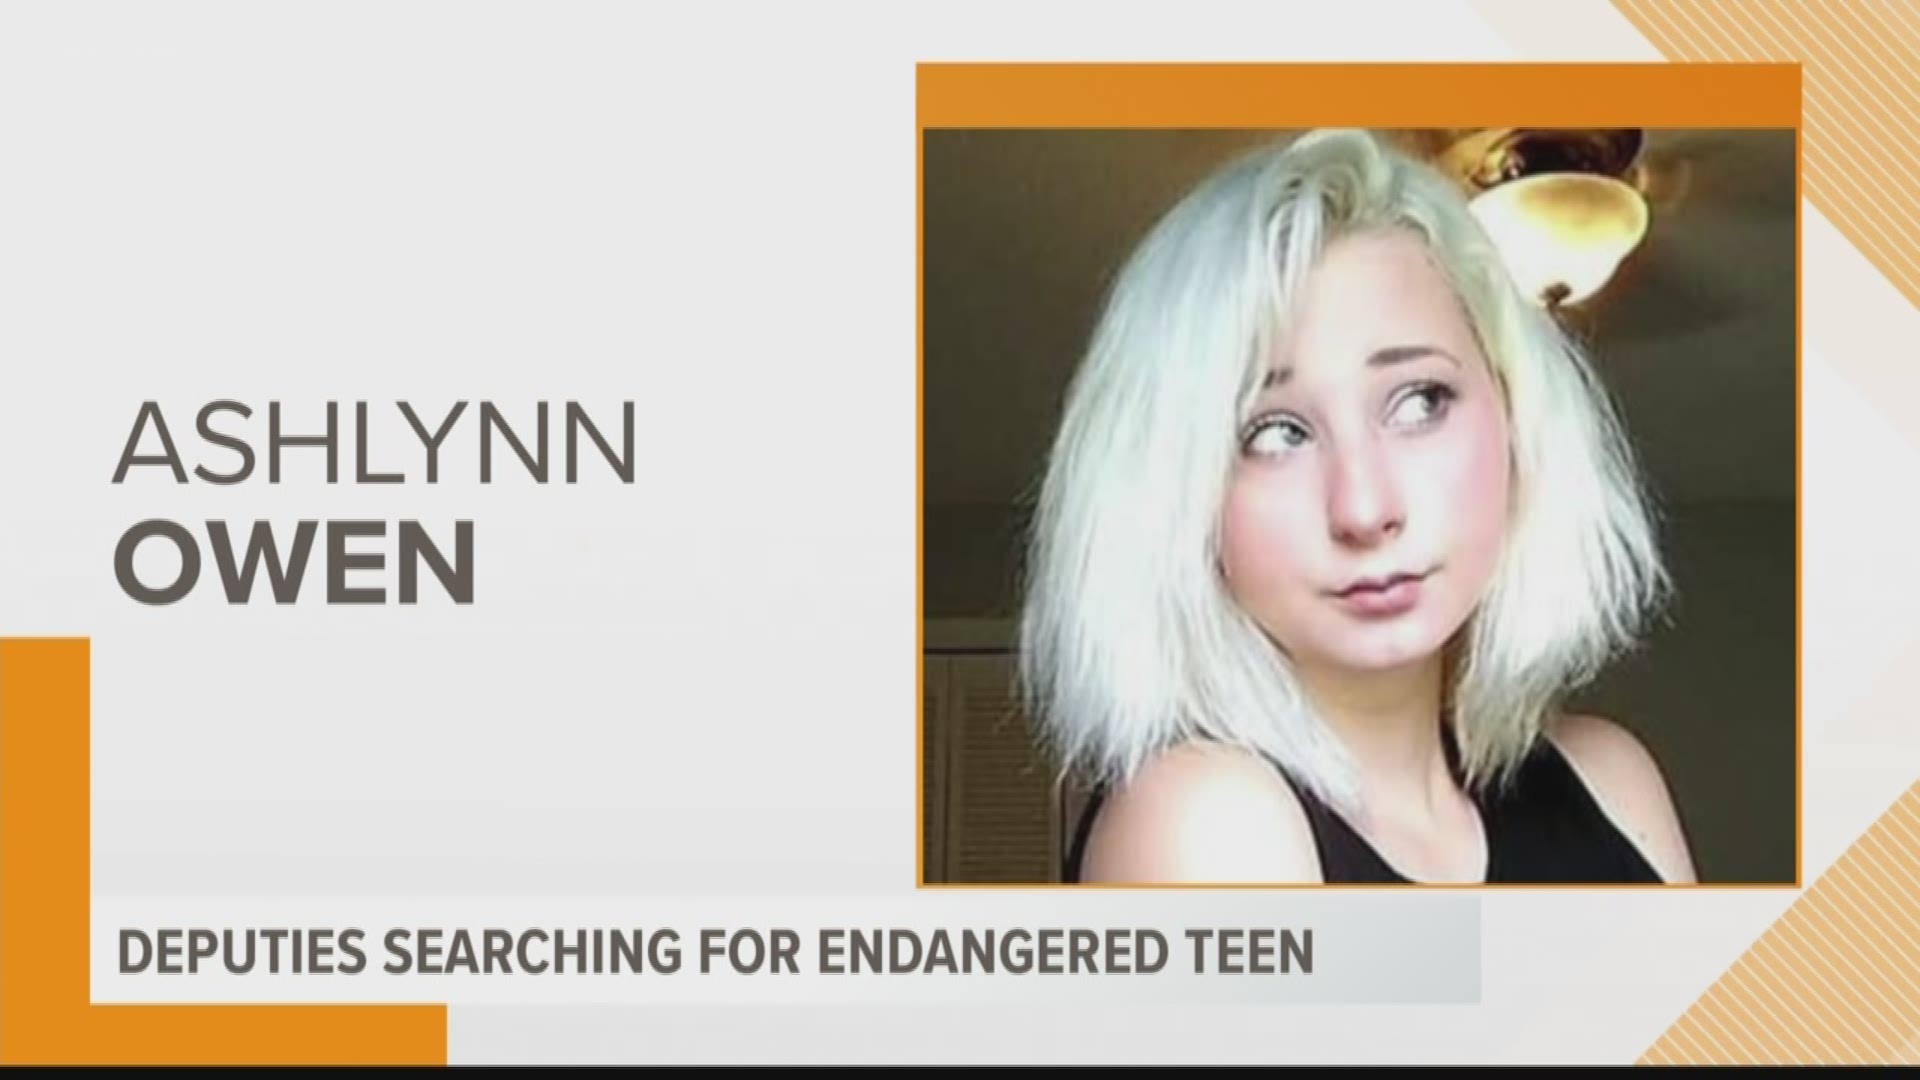 Anderson County deputies are searching for missing 16-year-old Ashlynn Owen, who was last seen on November 15, 2019.